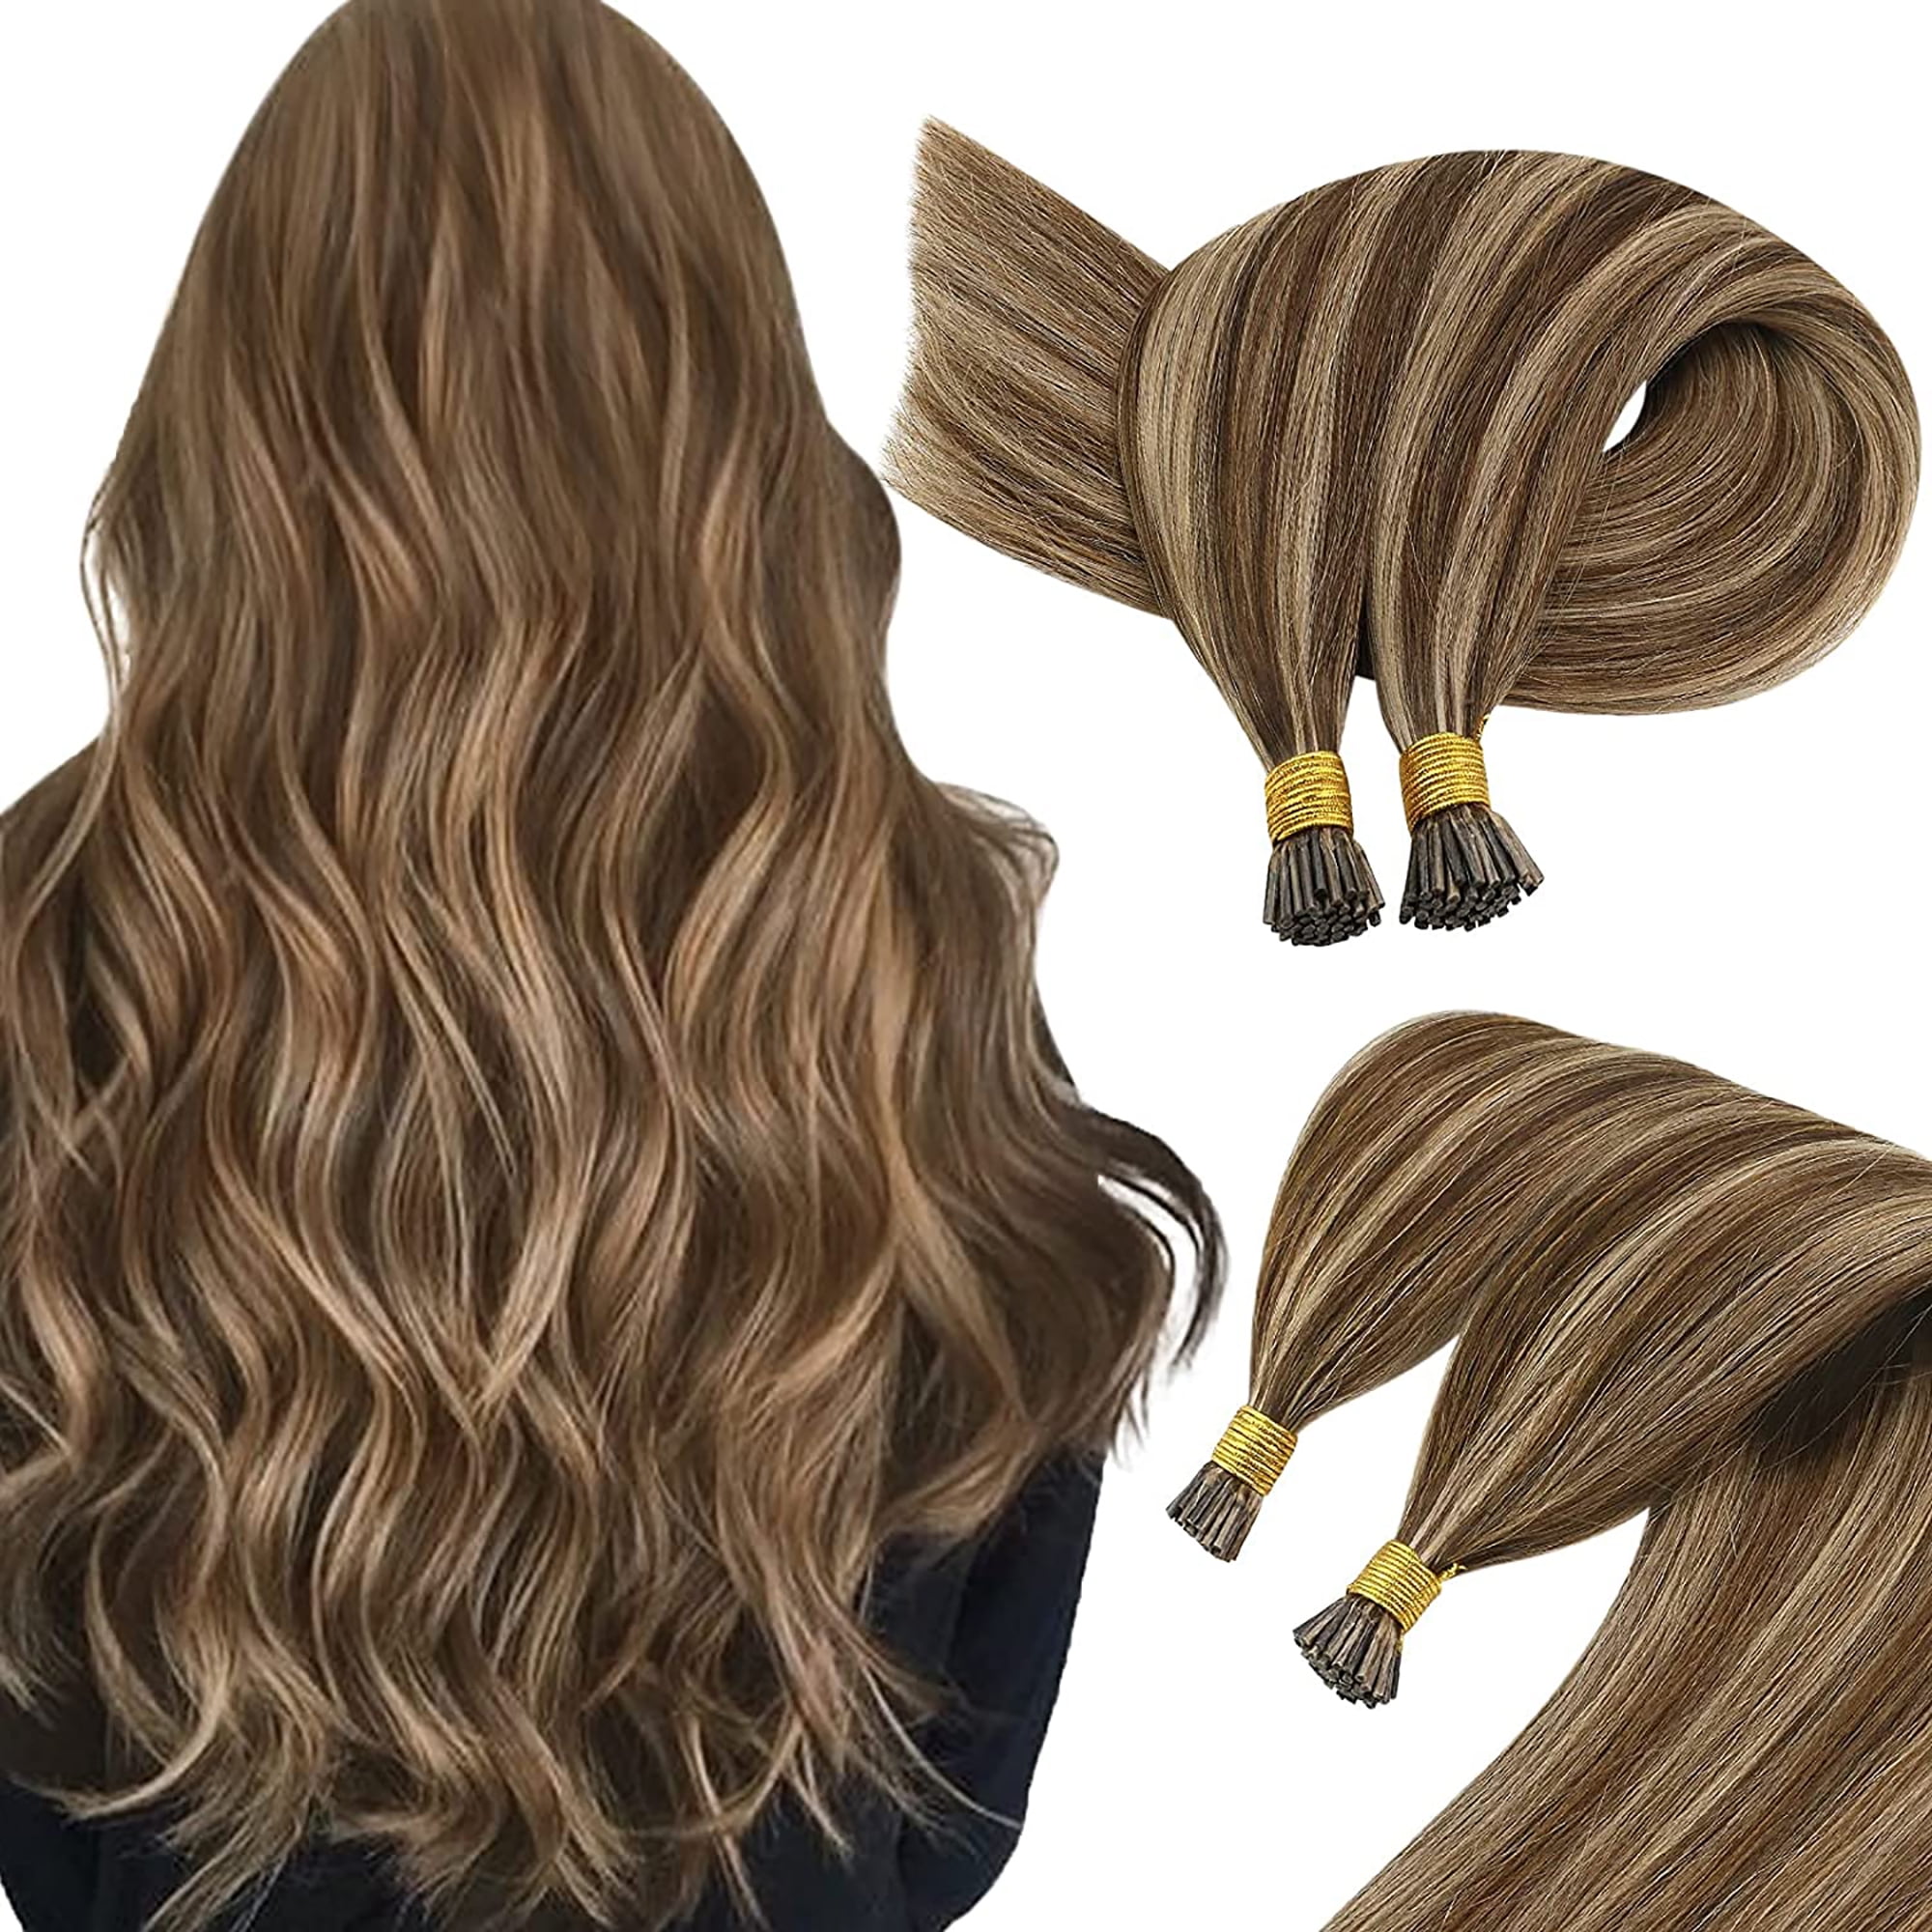 Sunny I Tip Keratin Hair Extensions Medium Brown and Caramel Blonde  Highlights 24 inch Real Remy Straight Hair 50g 